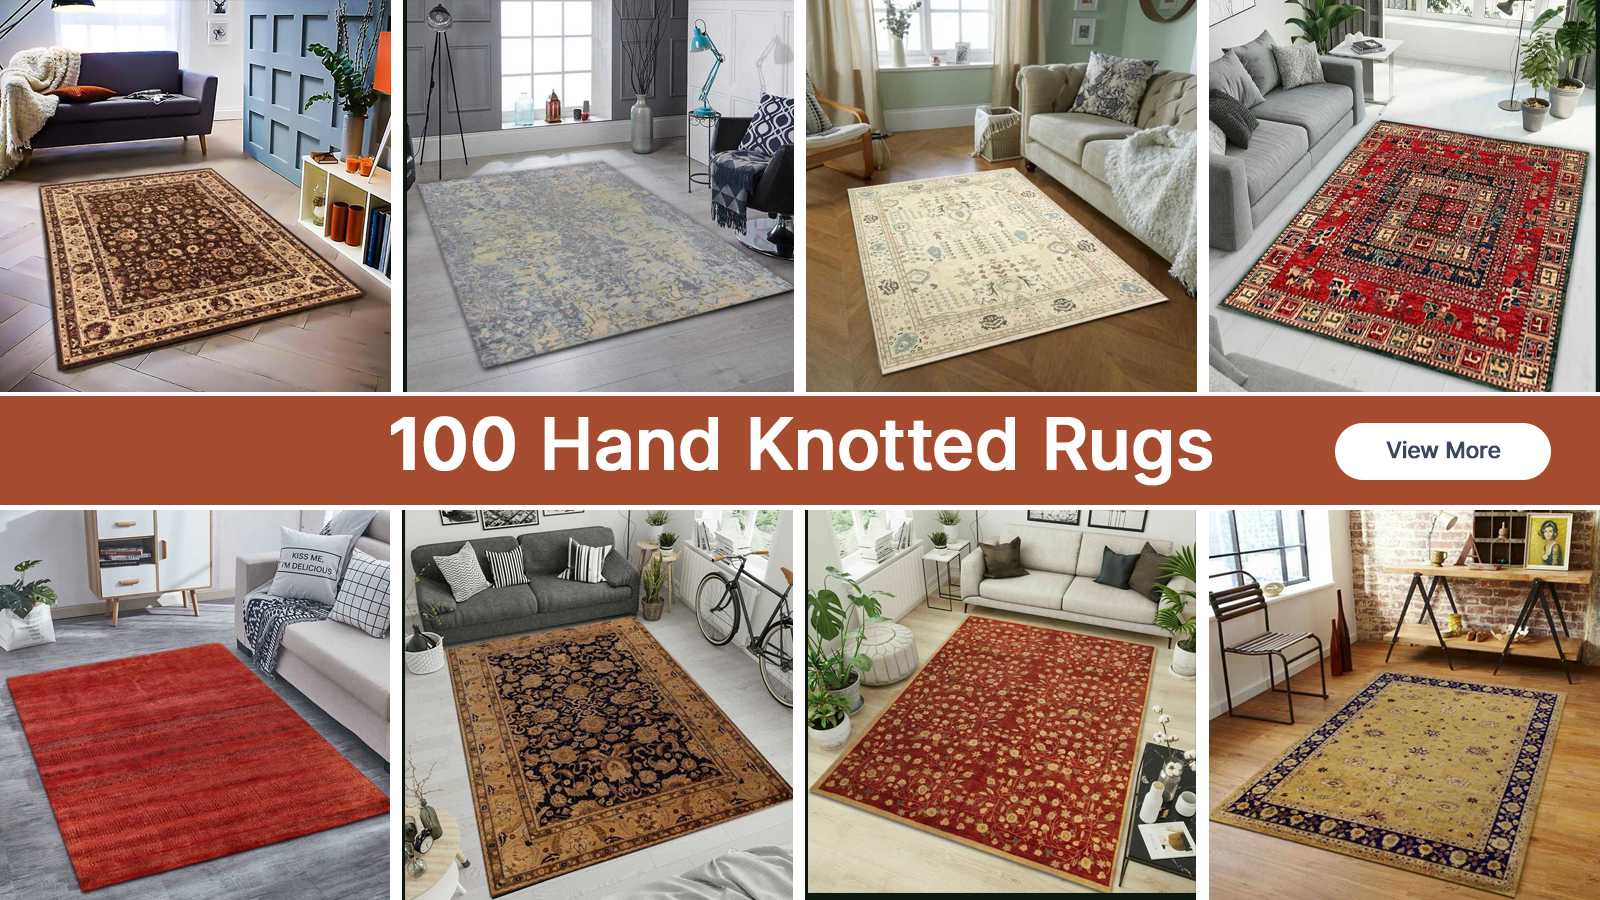 25 Rules To Buy Hand-Knotted Rugs - RugKnots